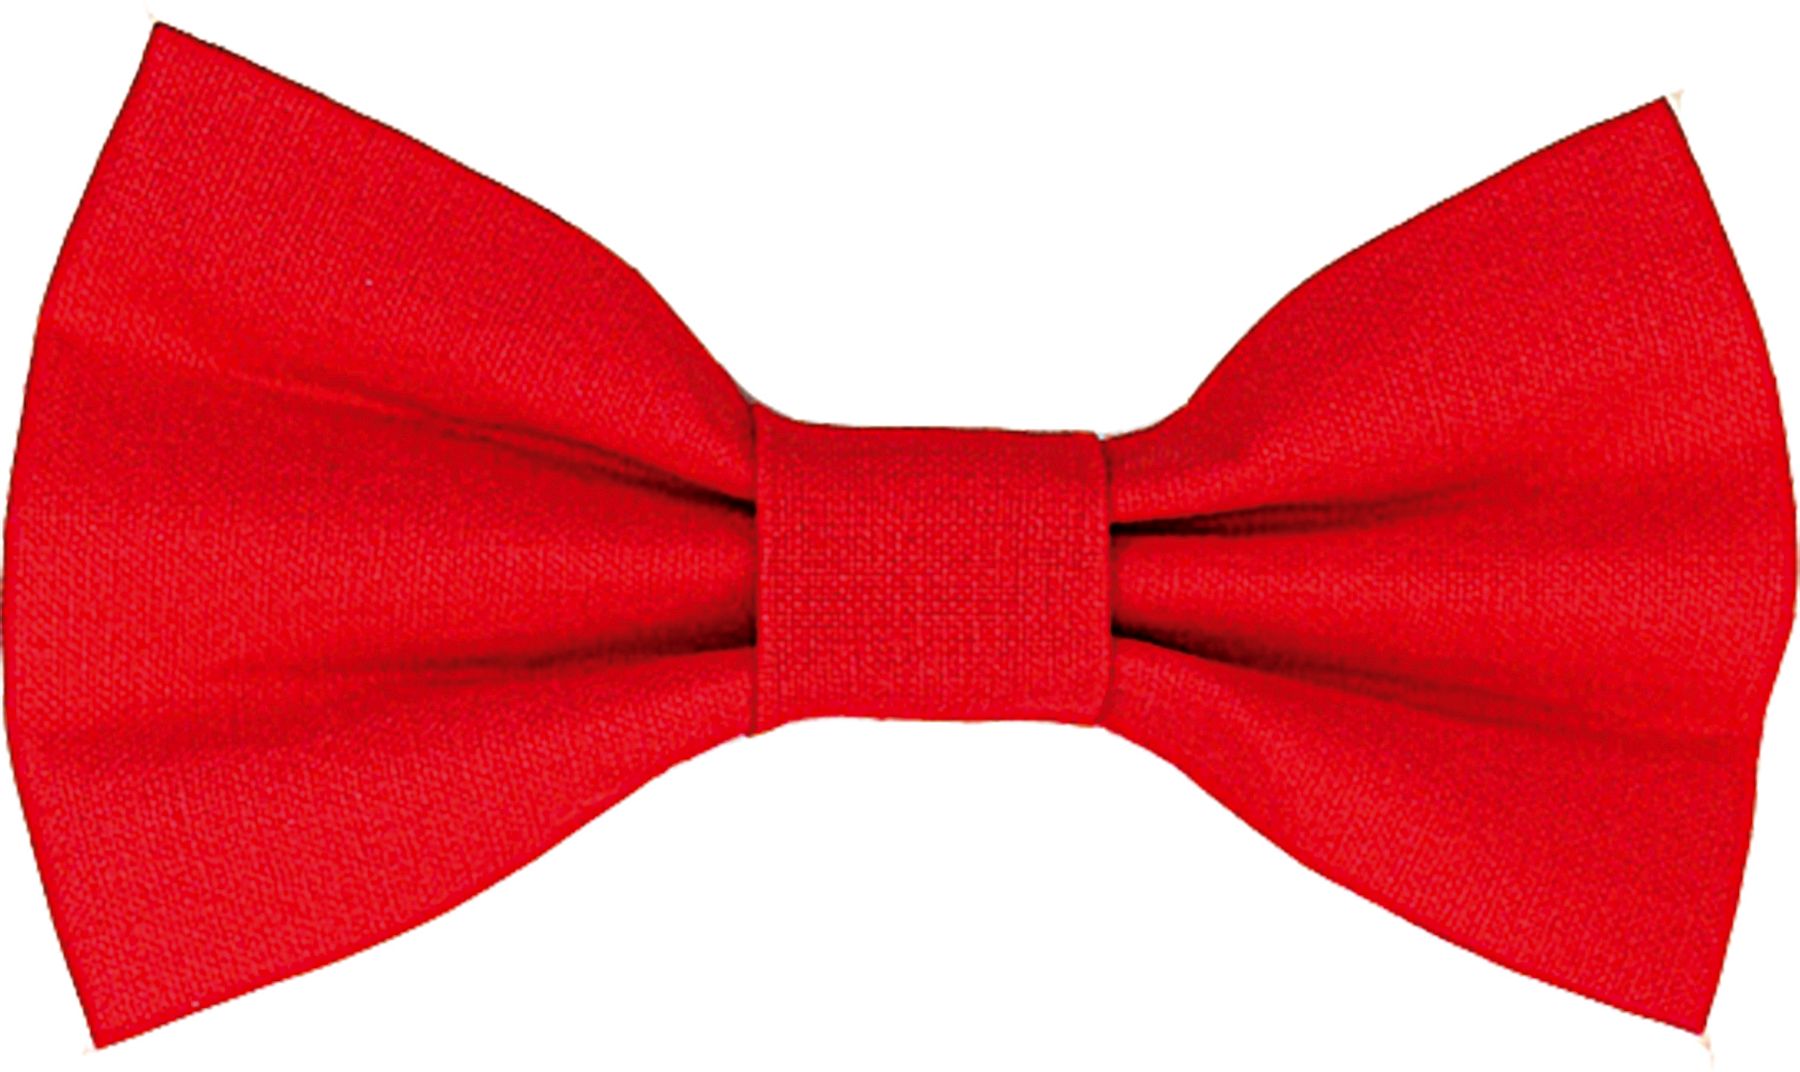 Bow tie 12cm, red